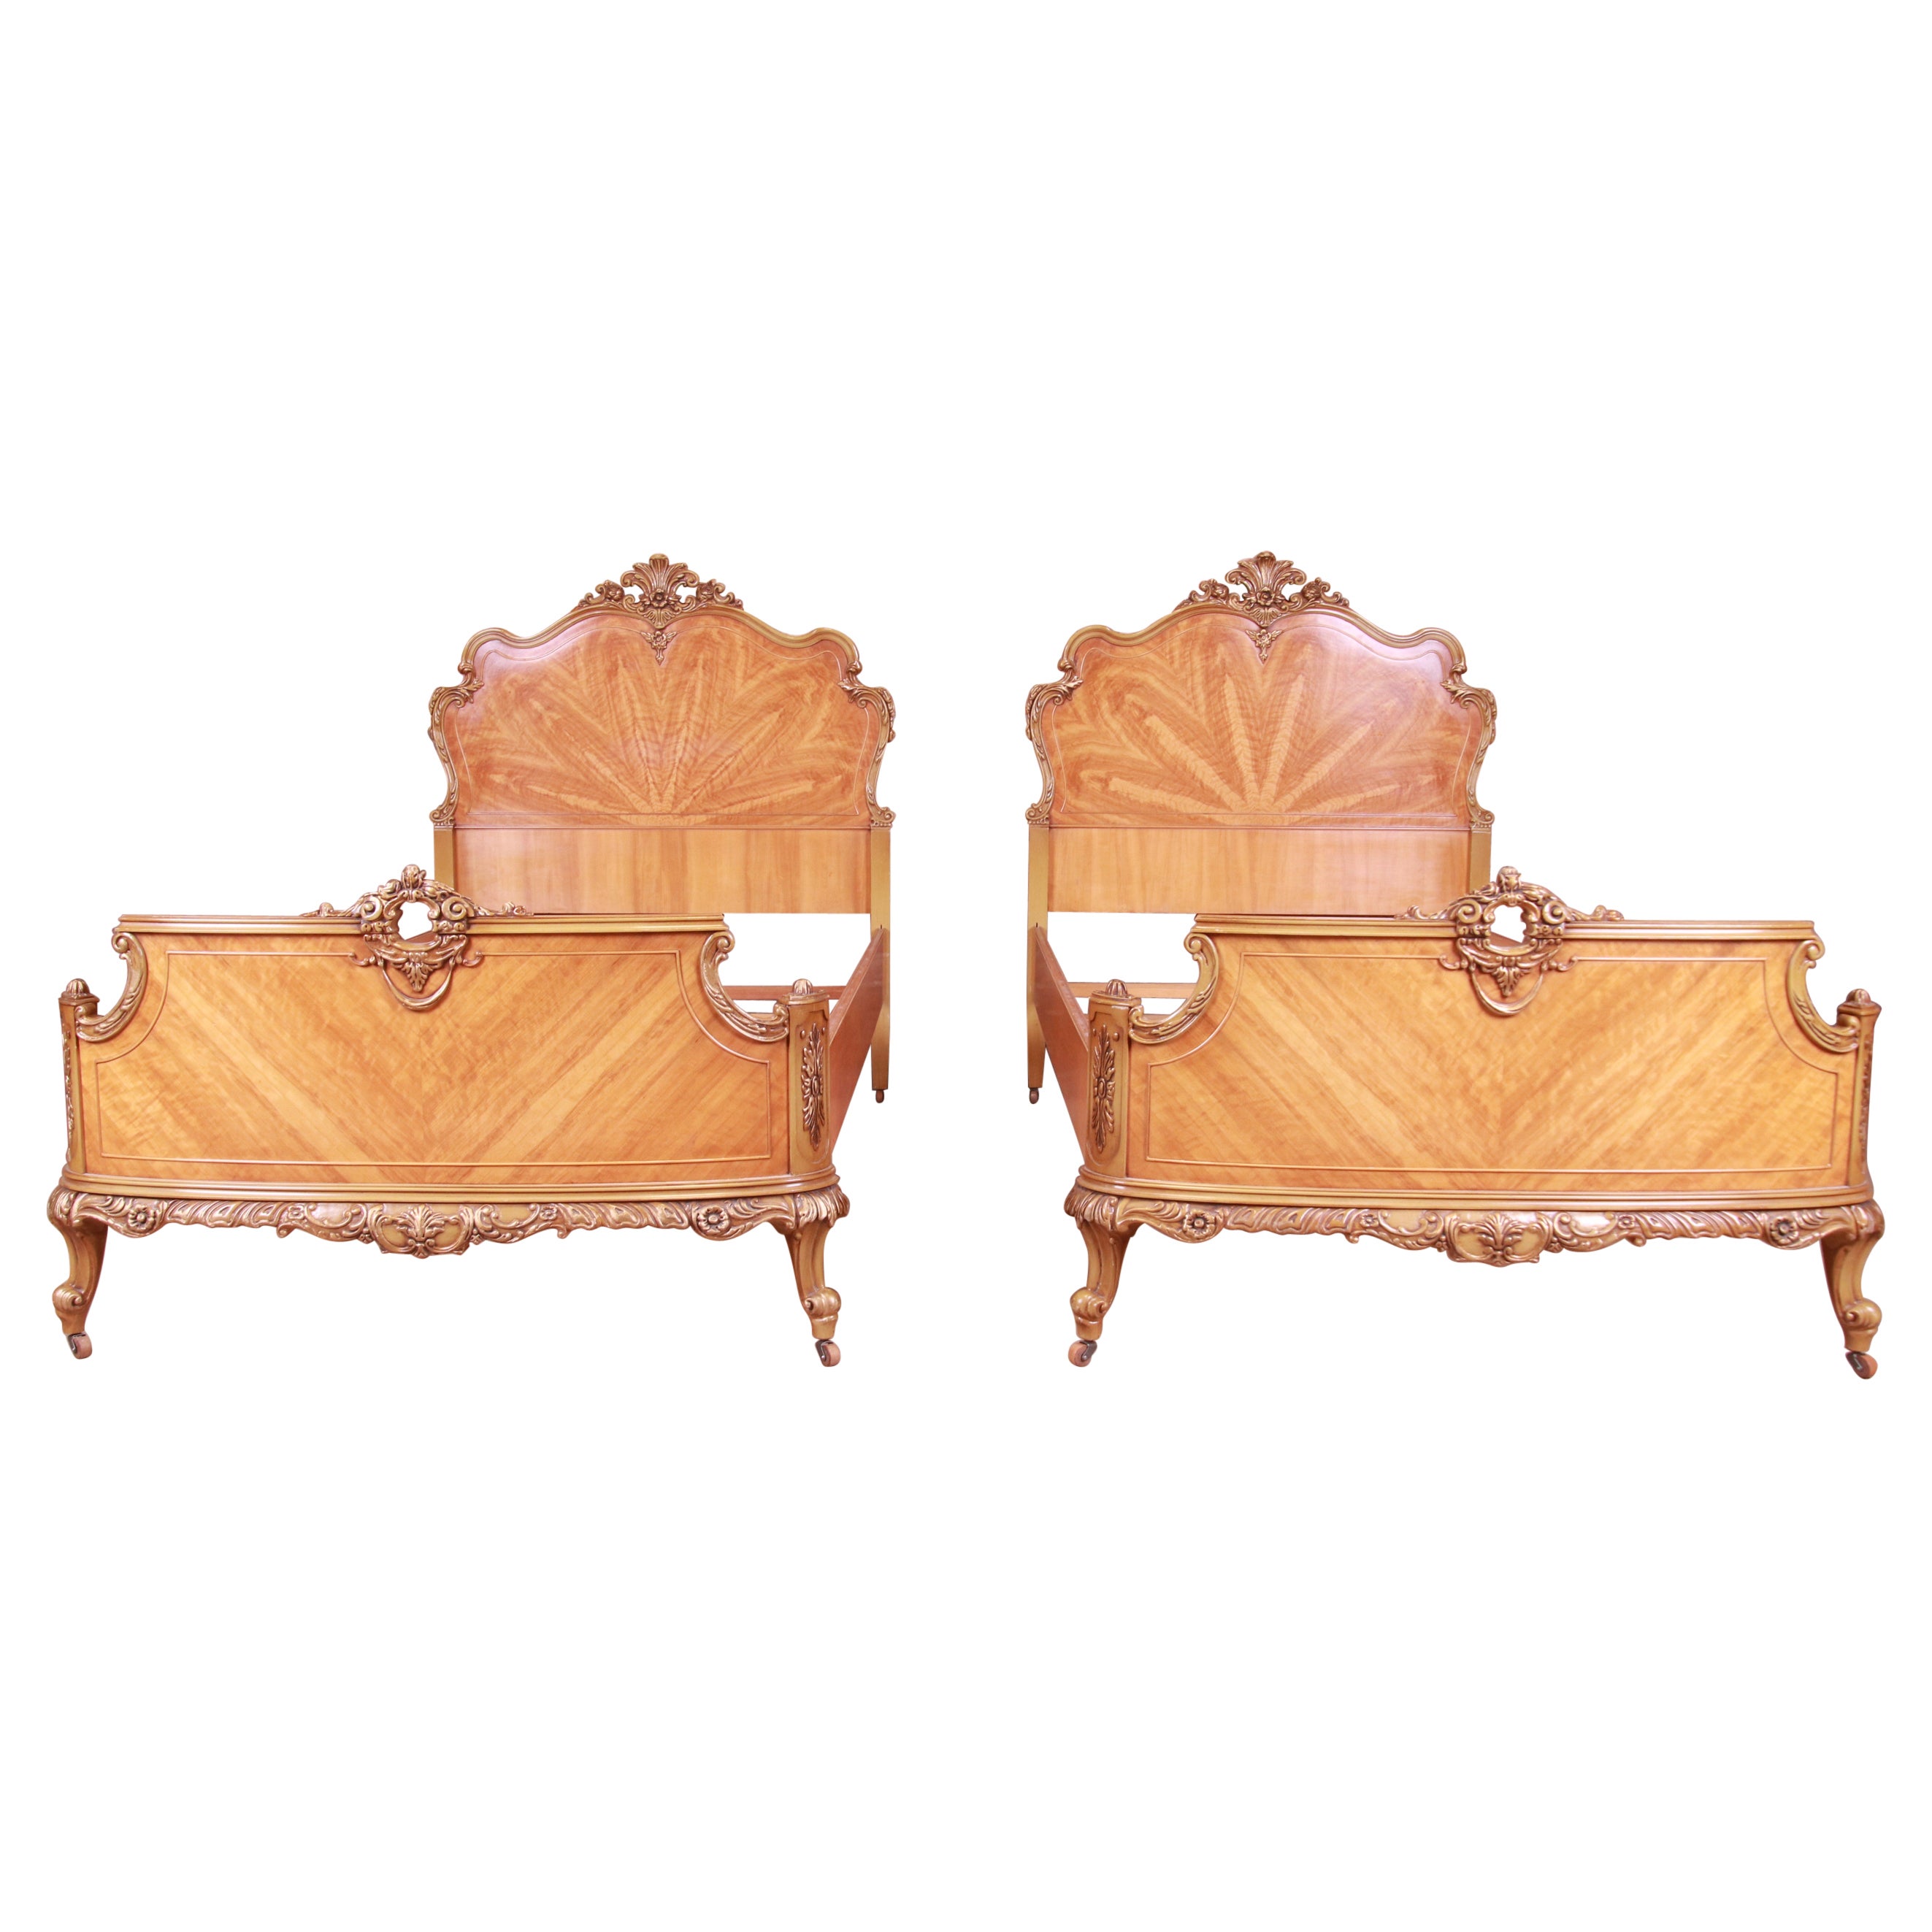 Antique Romweber French Rococo Louis XV Inlaid Satinwood Twin Beds, Pair